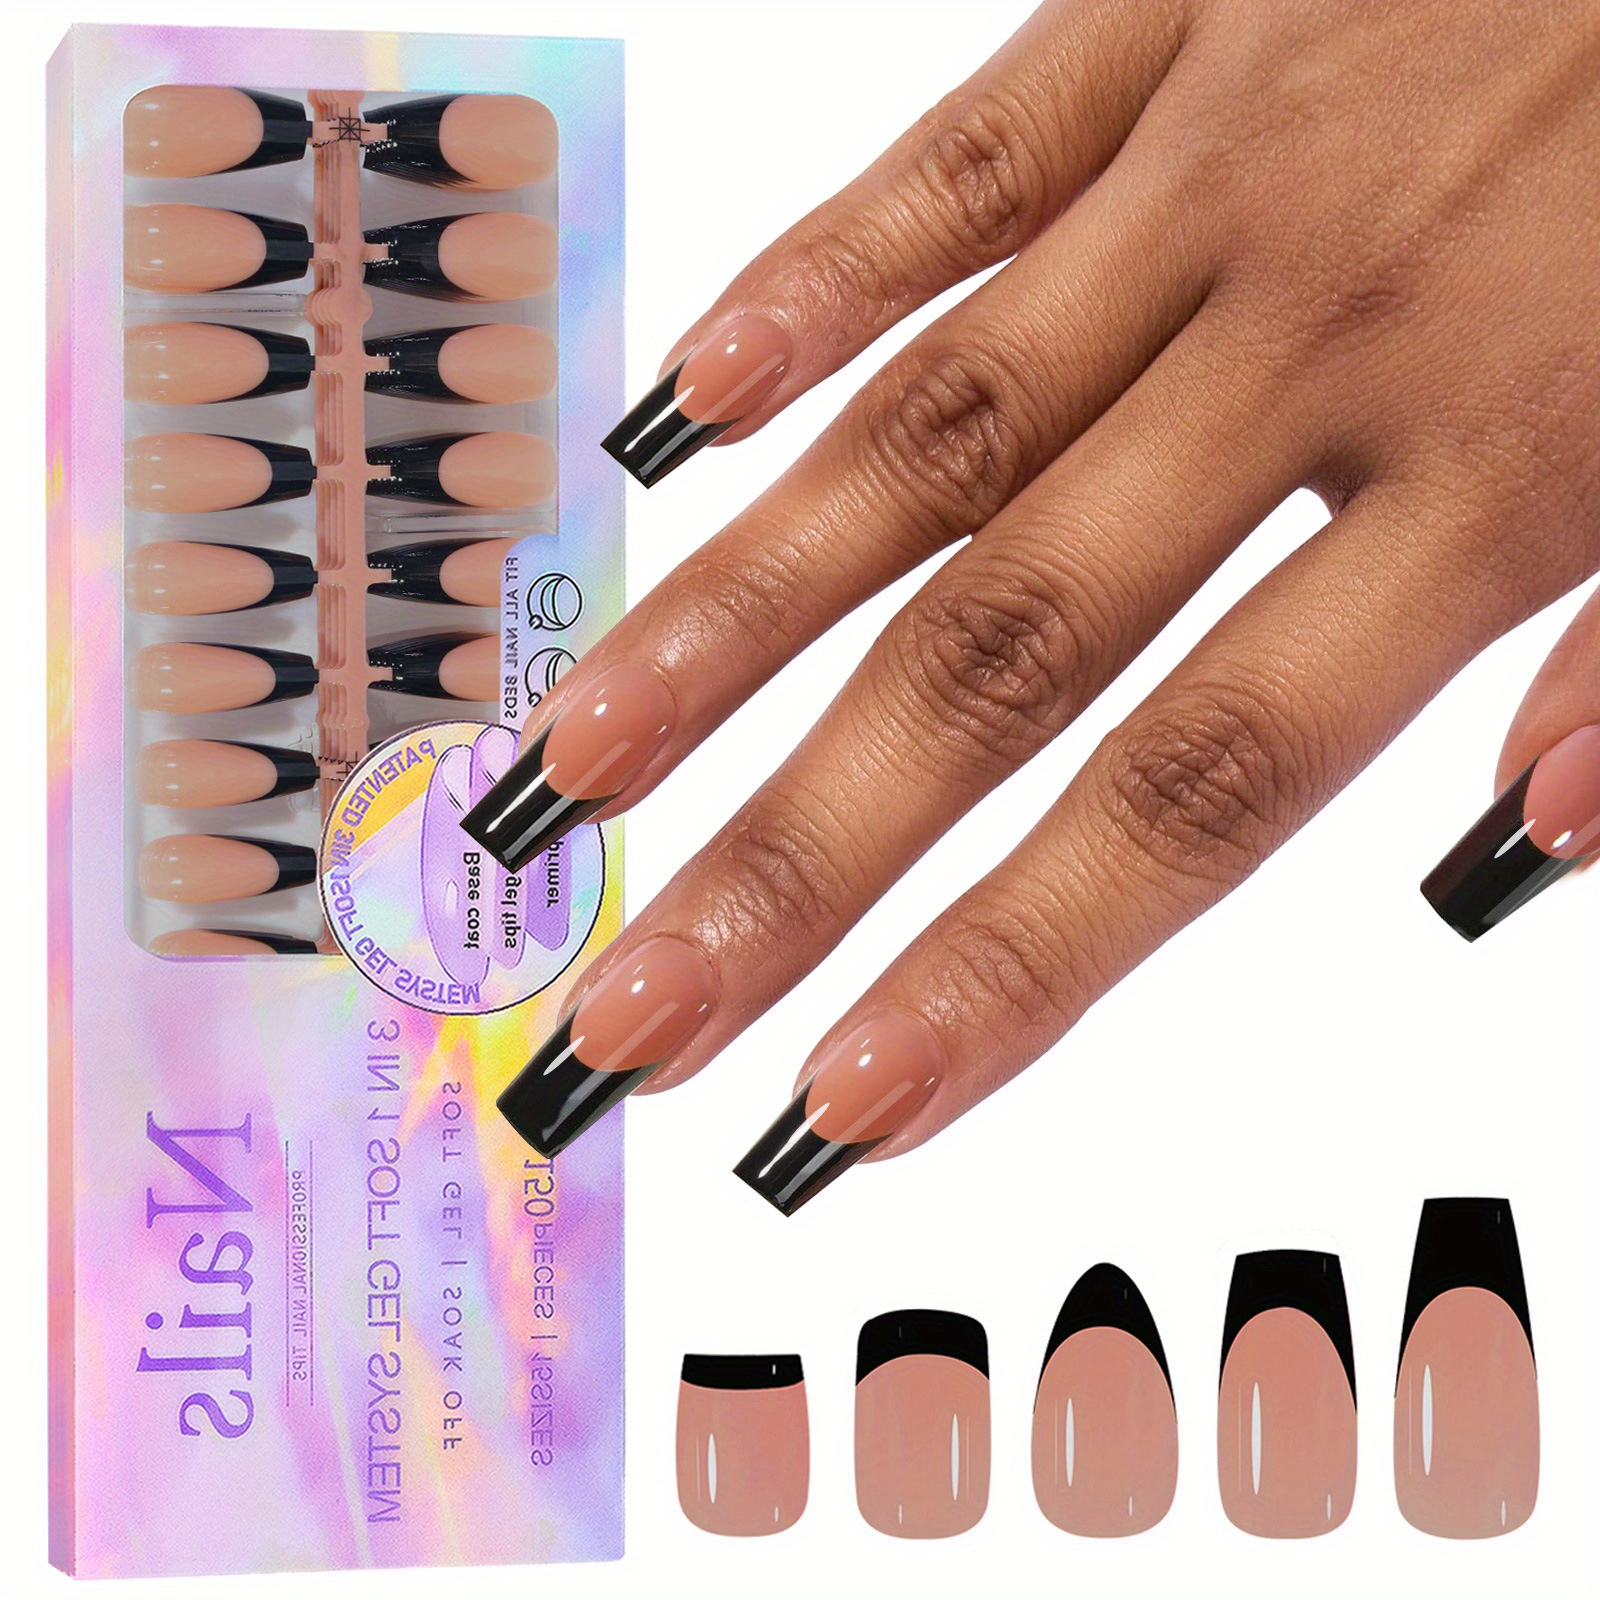 Gel X Nail Kit - 2 in 1 Nail Glue and Base Coat with Clear and Apricot